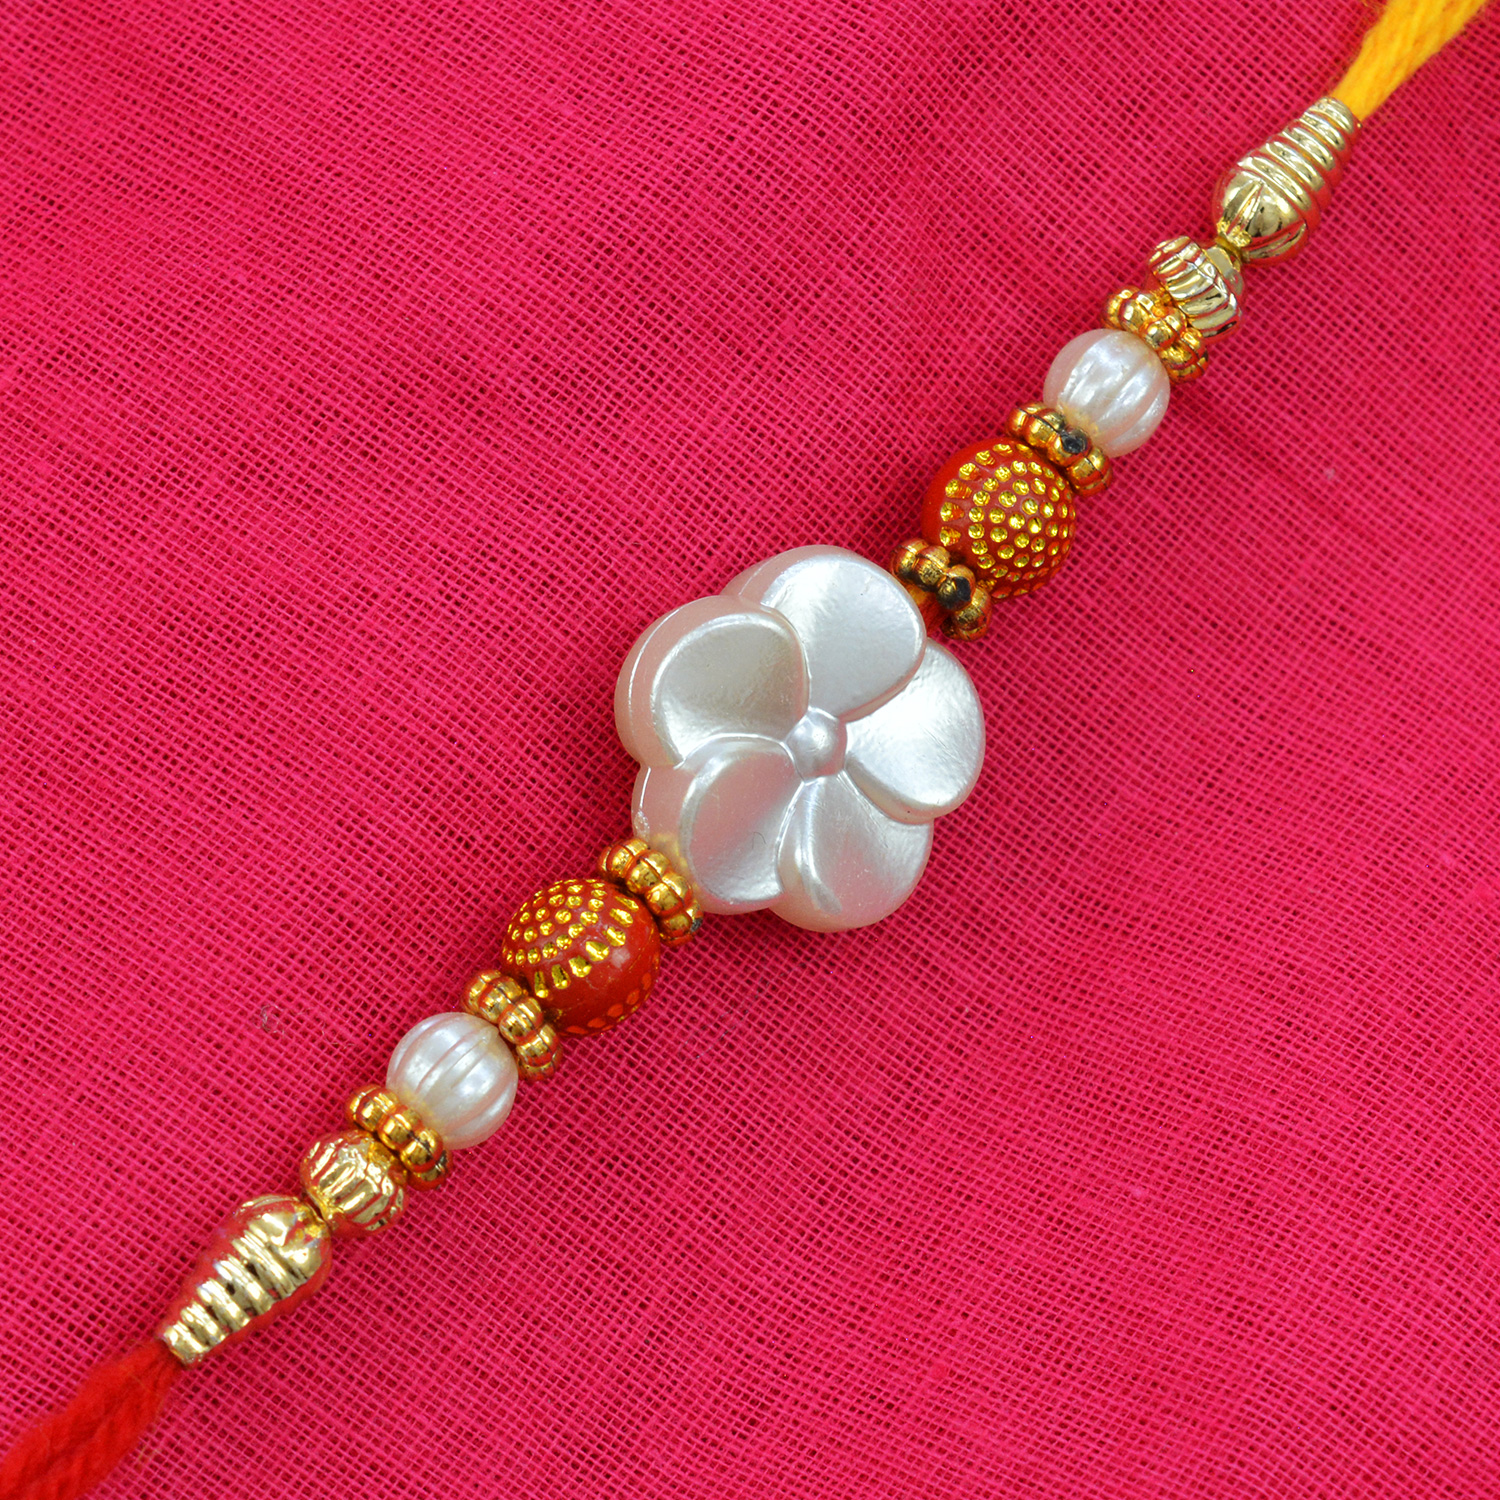 Scrumptious Rounded Shape White Flower with Multi-color Pearls